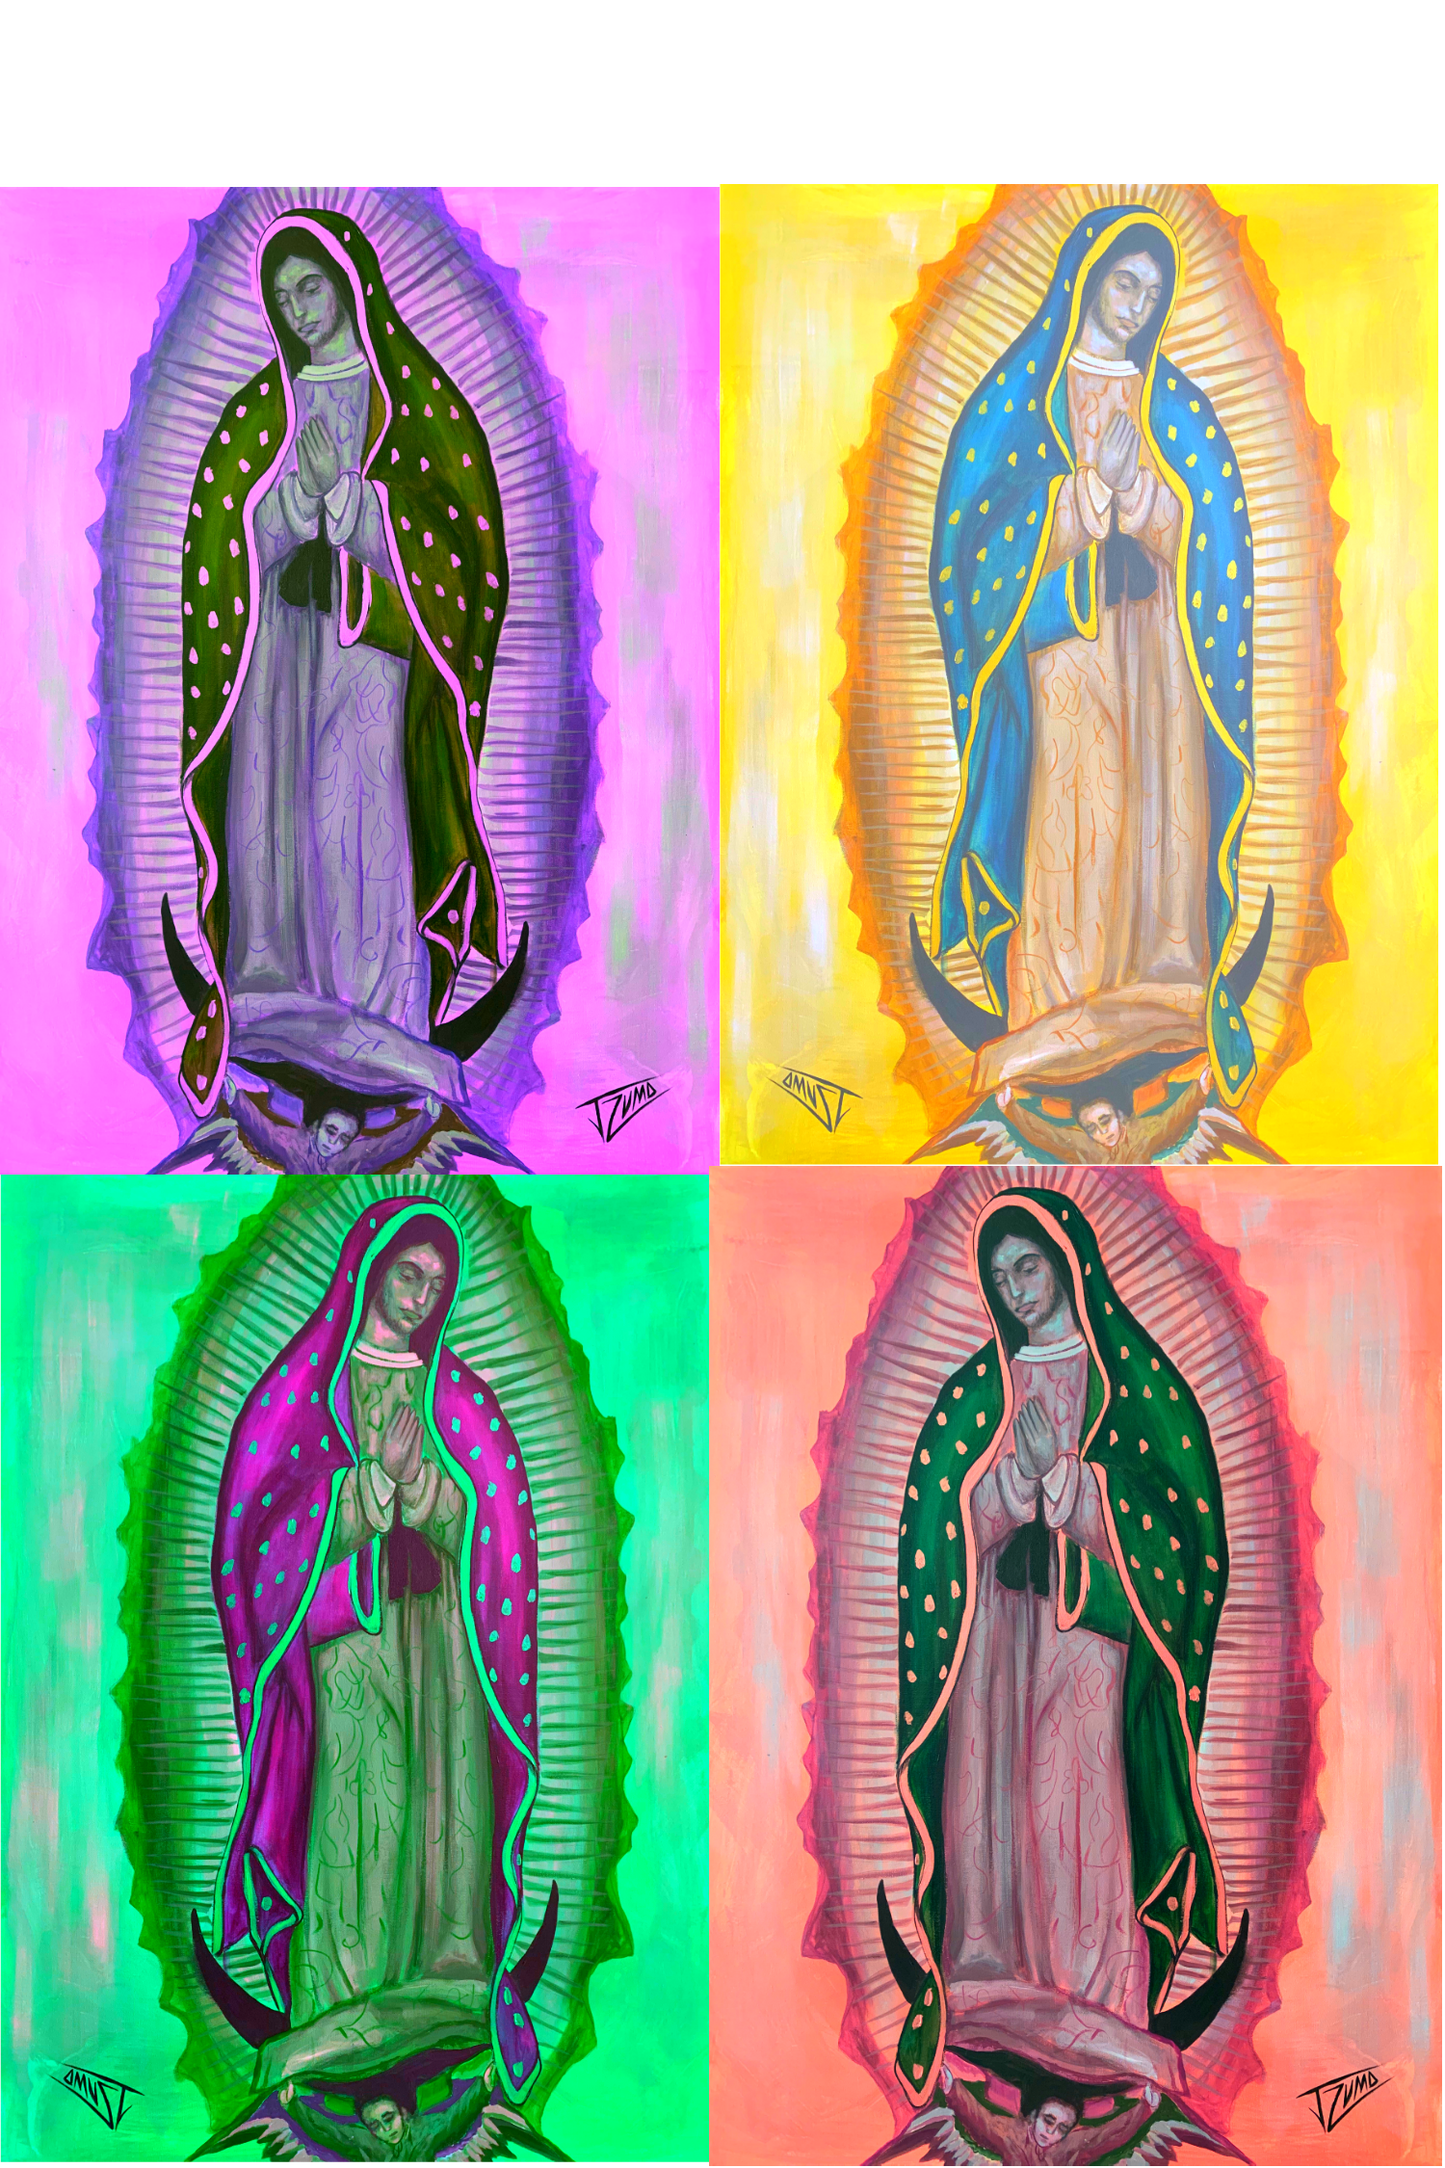 Our Lady of Guadalupe - Spectral Vision 1